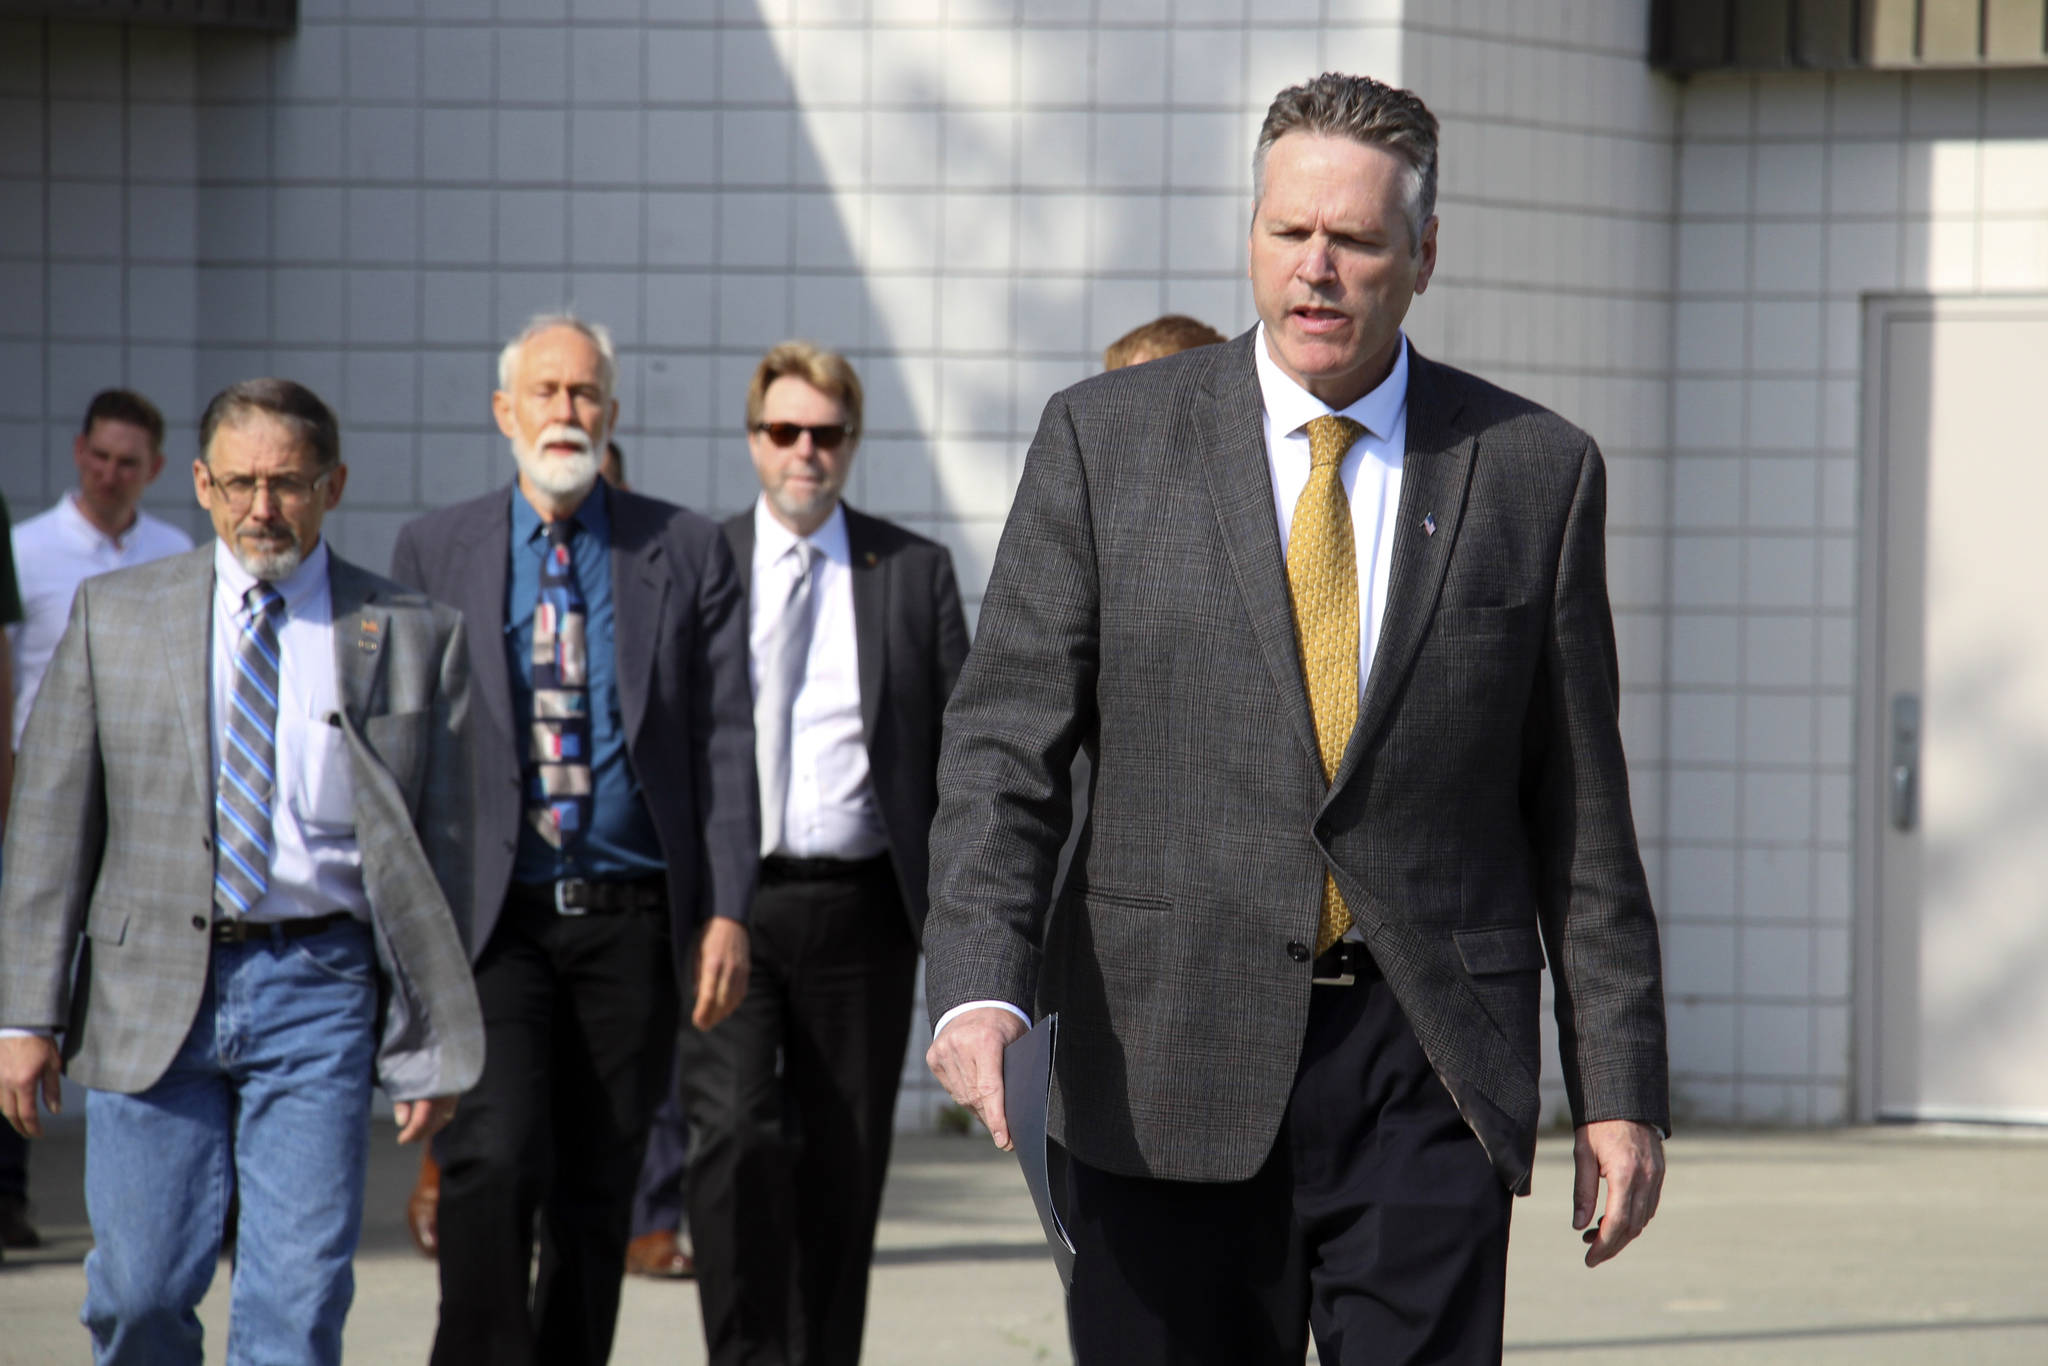 This June 14, 2019 file photo shows Alaska Gov. Mike Dunleavy leading state and local officials out of Wasilla Middle School in Wasilla, Alaska, to a news conference. State lawmakers have rejected Dunleavy’s suggested location for a special session. House Speaker Bryce Edgmon and Senate President Cathy Giessel issued a joint statement Monday, June 24, 2019 saying they will convene July 8 in Juneau and hold most hearings in Anchorage. Dunleavy had called the session for Wasilla, his hometown and conservative base.(AP Photo/Mark Thiessen, File)